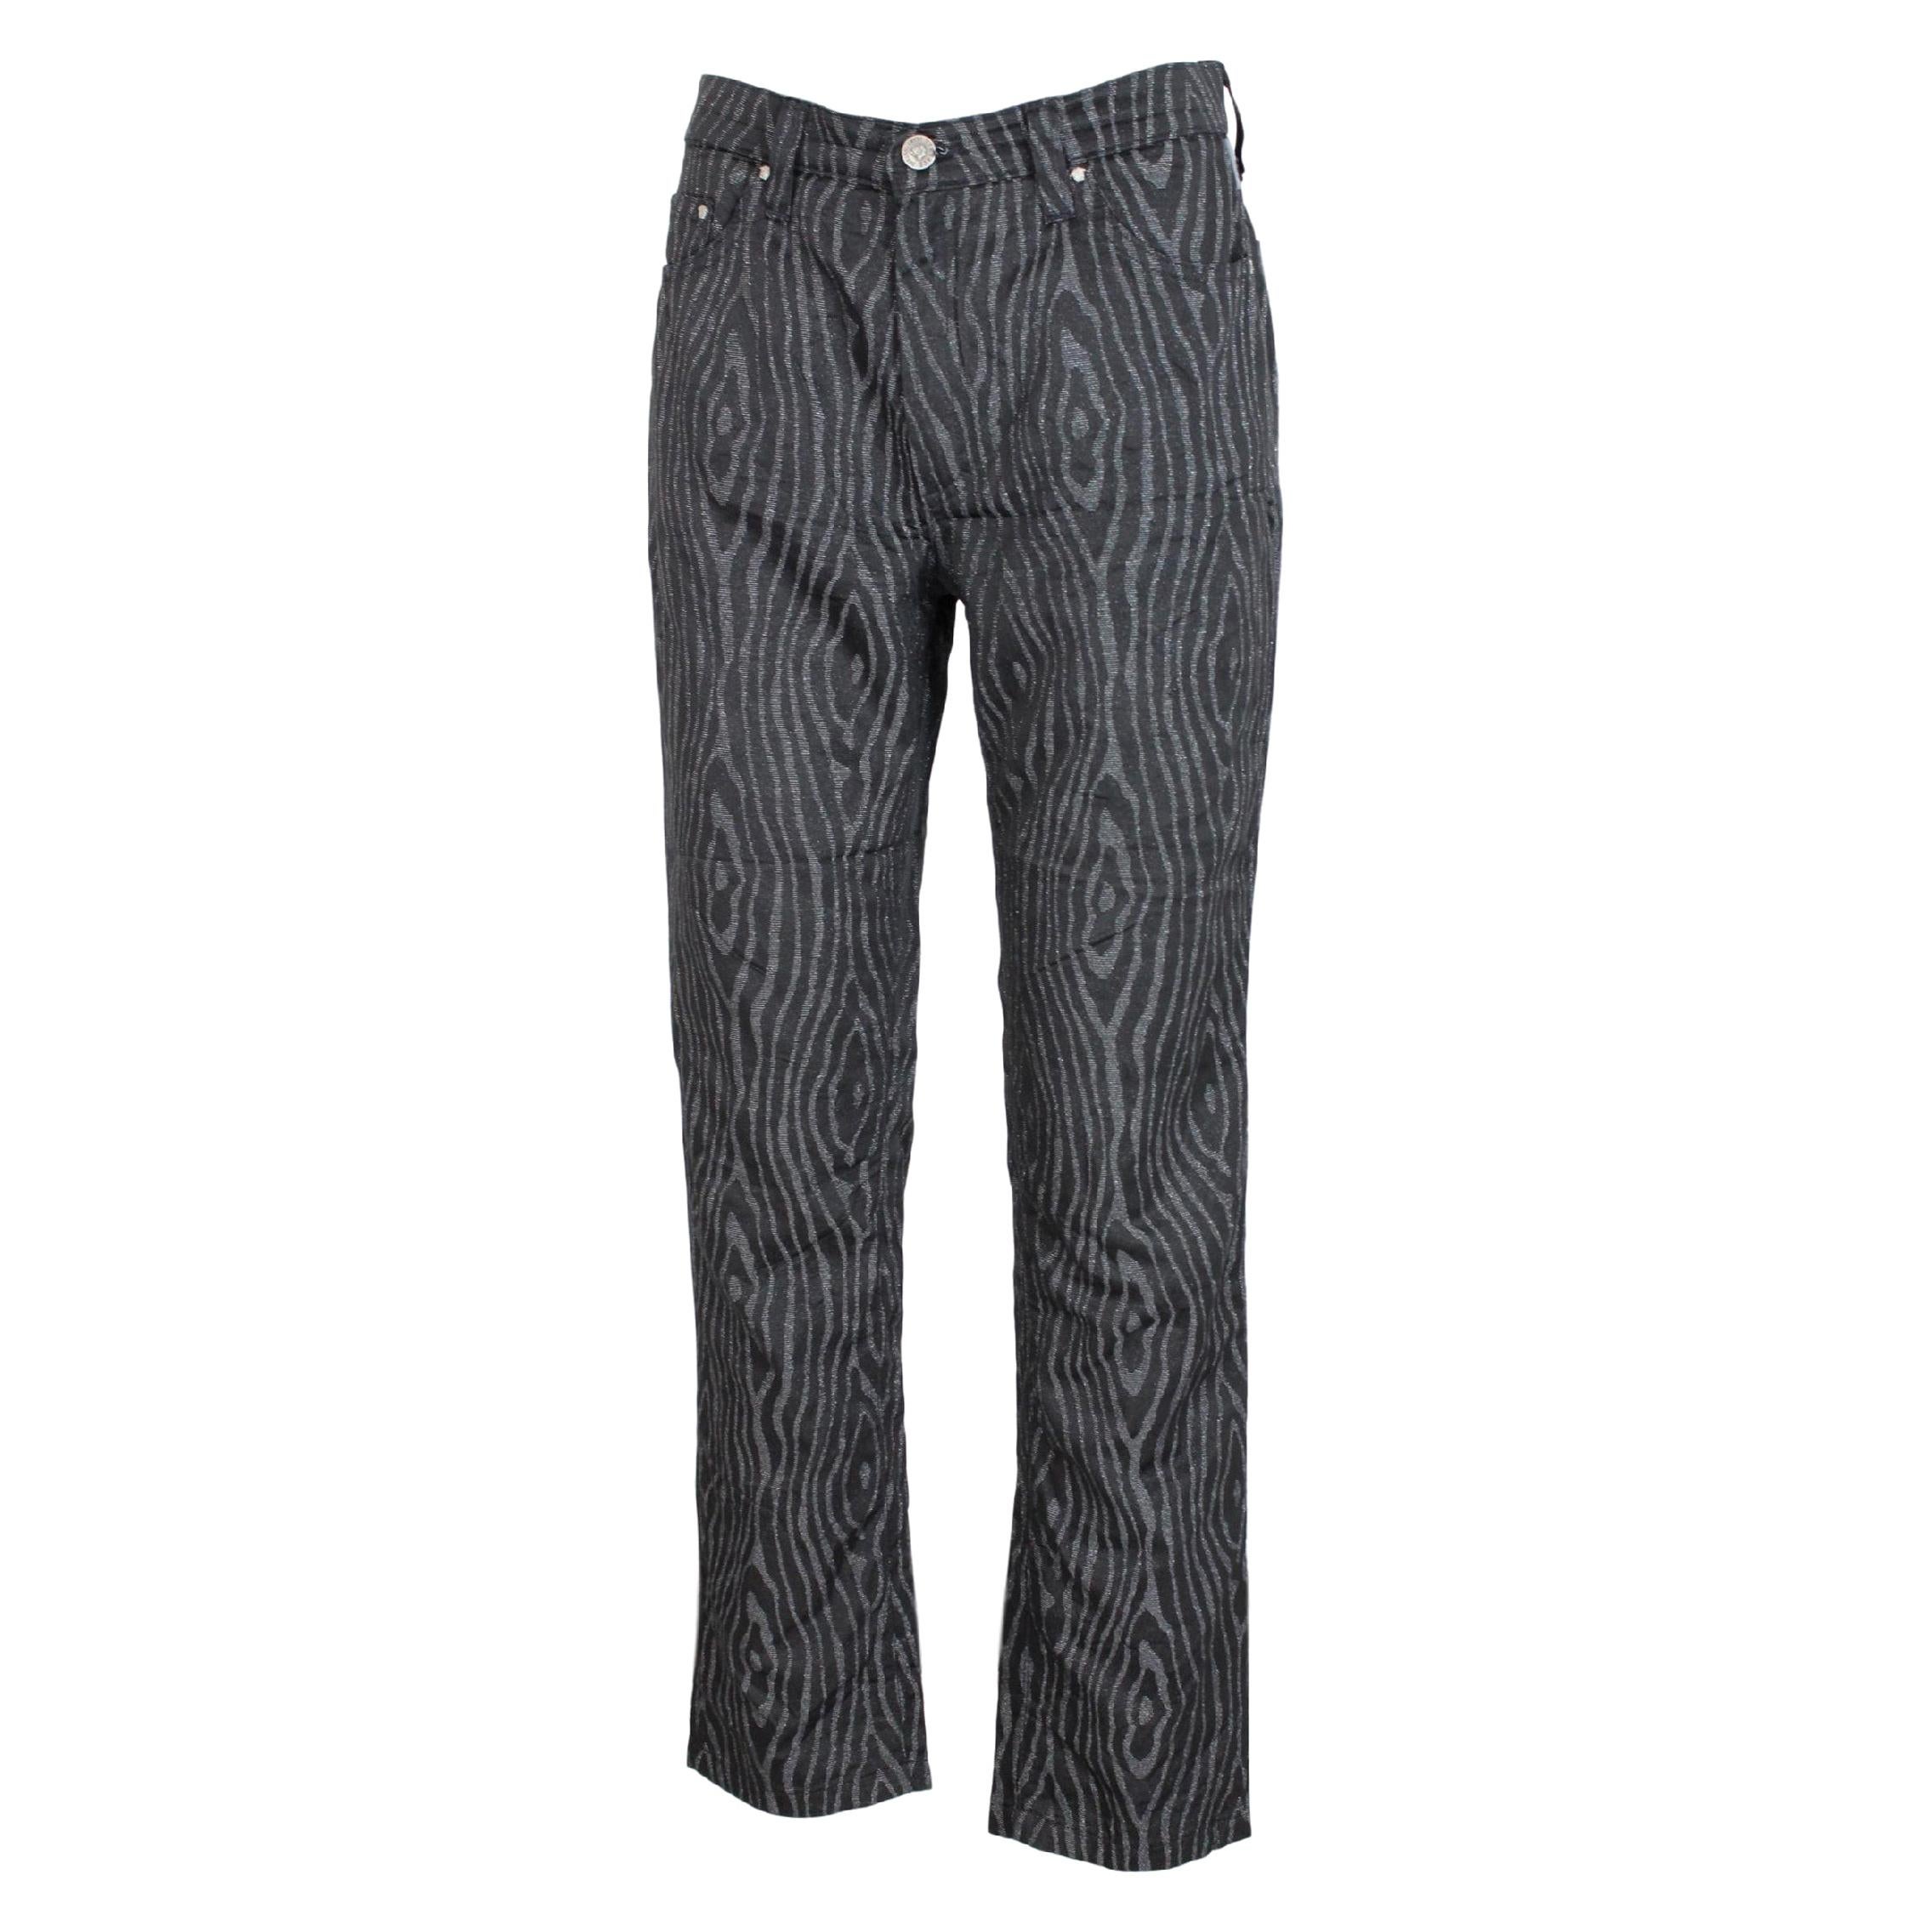 Gianni Versace Black Gray Pinstripe Spotted Lurex Trousers